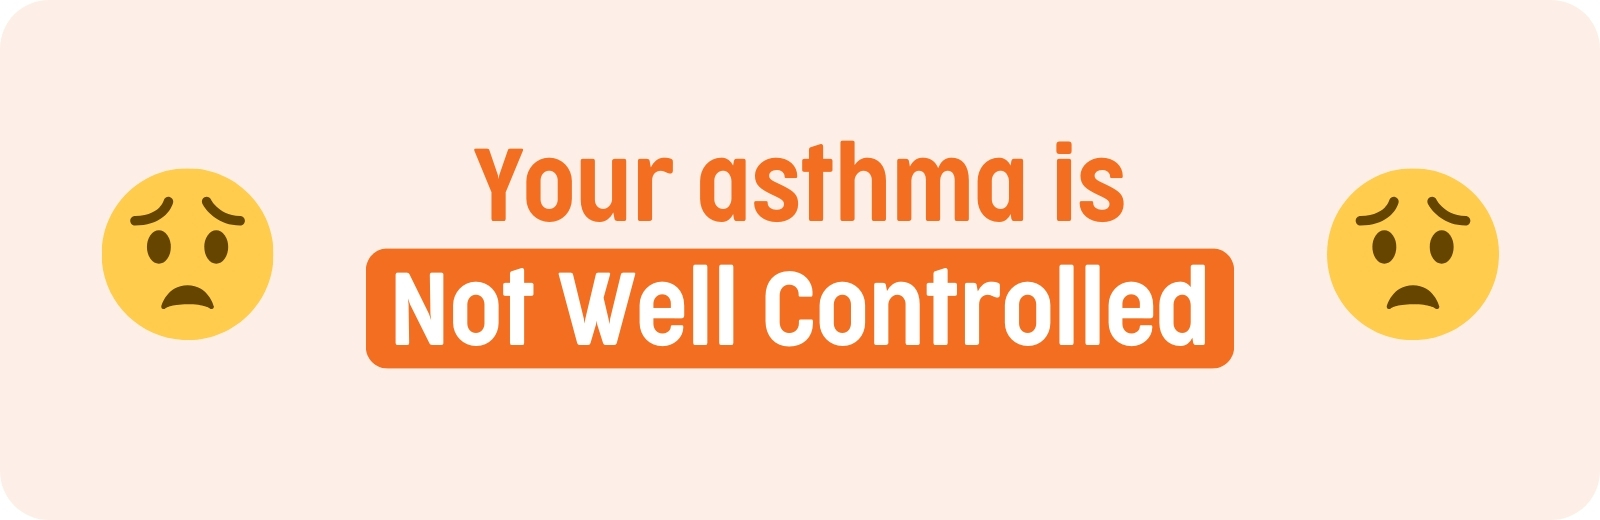 Asthma Control Questionaire, Not Well Controlled Asthma